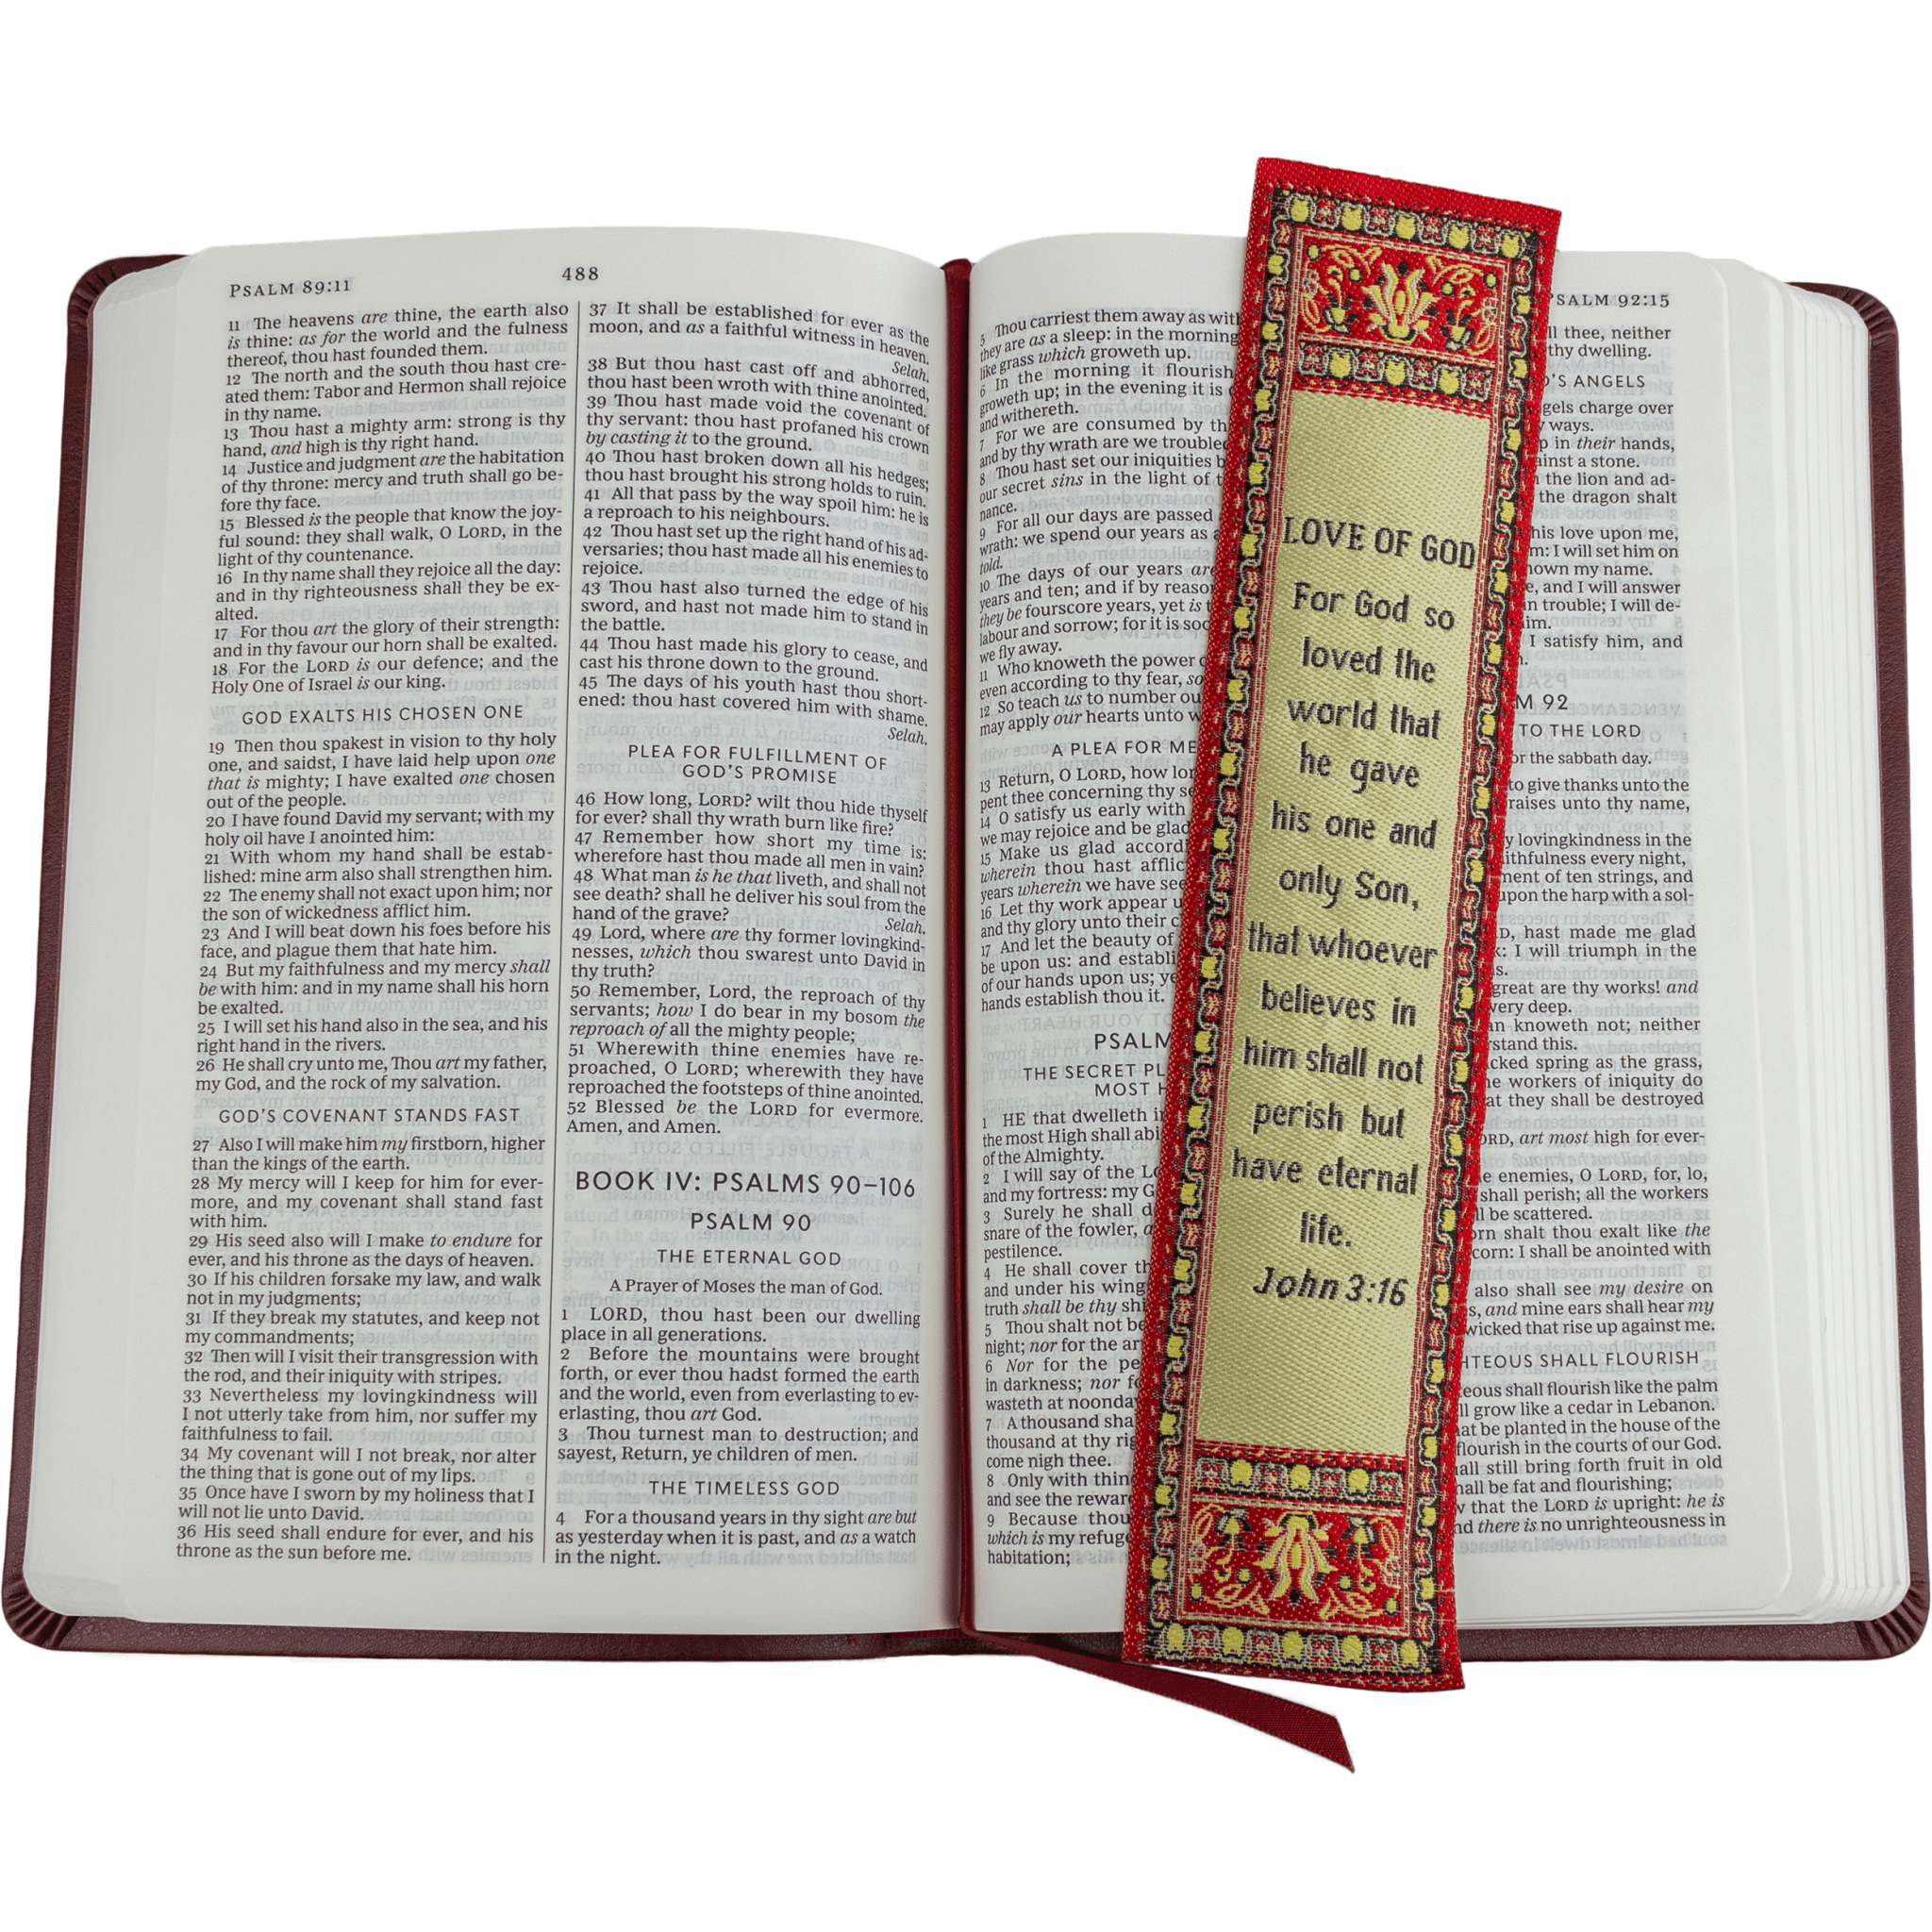 For God so Loved the World, Woven Fabric Christian Bookmark, Love of God, Silky Soft John 3:16 Bookmarker for Novels Books and Bibles, Traditional Turkish Design, Flexible Memory Verse Bookmark Gift